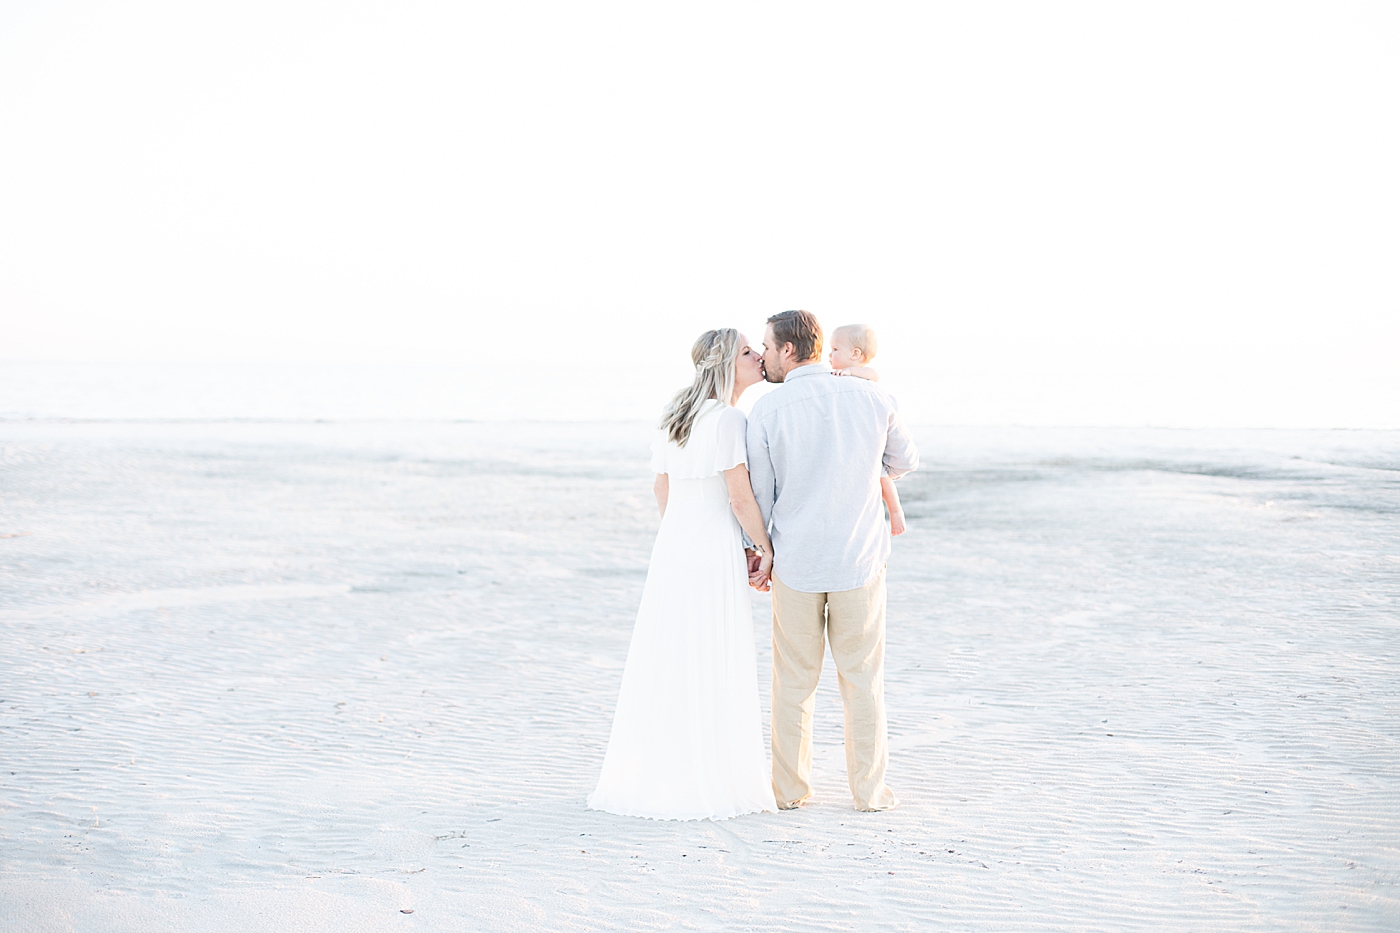 Mom and Dad kissing on the beach at sunset during family photoshoot. Photo by Little Sunshine Photography.